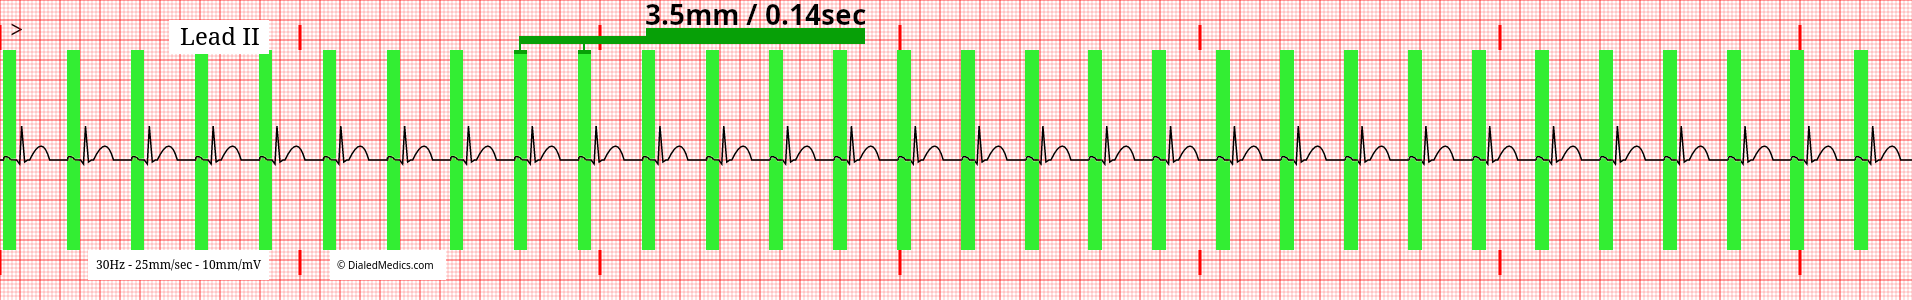 ECG tracing of a normal sinus rhythm with a HR of 94 and P-R Intervals marked.